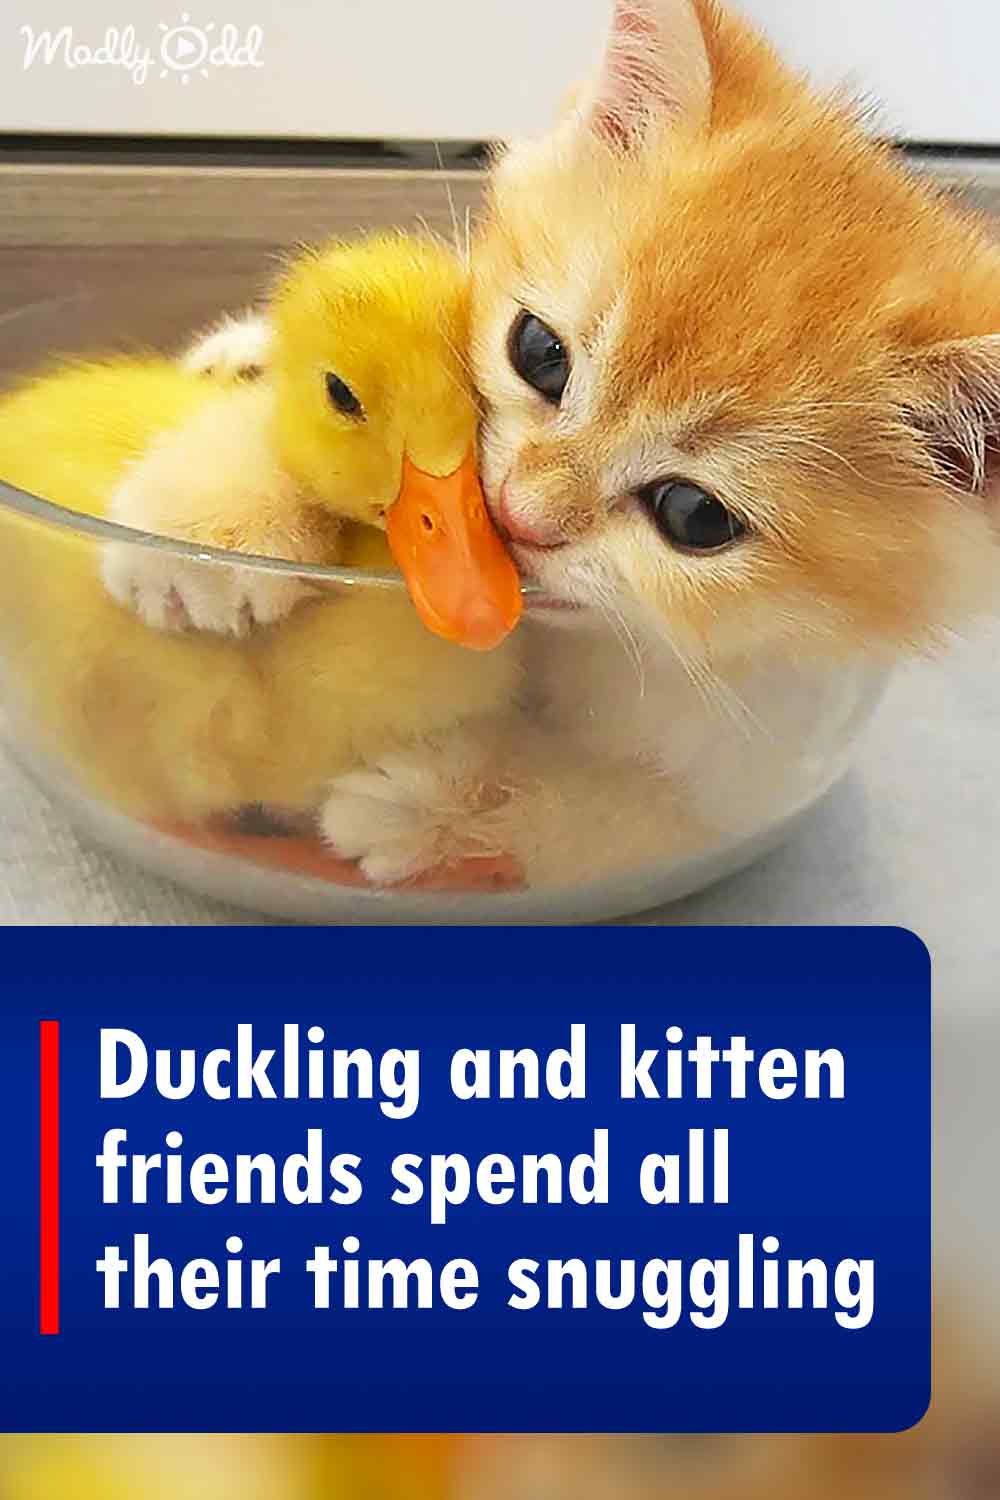 Duckling and kitten friends spend all their time snuggling